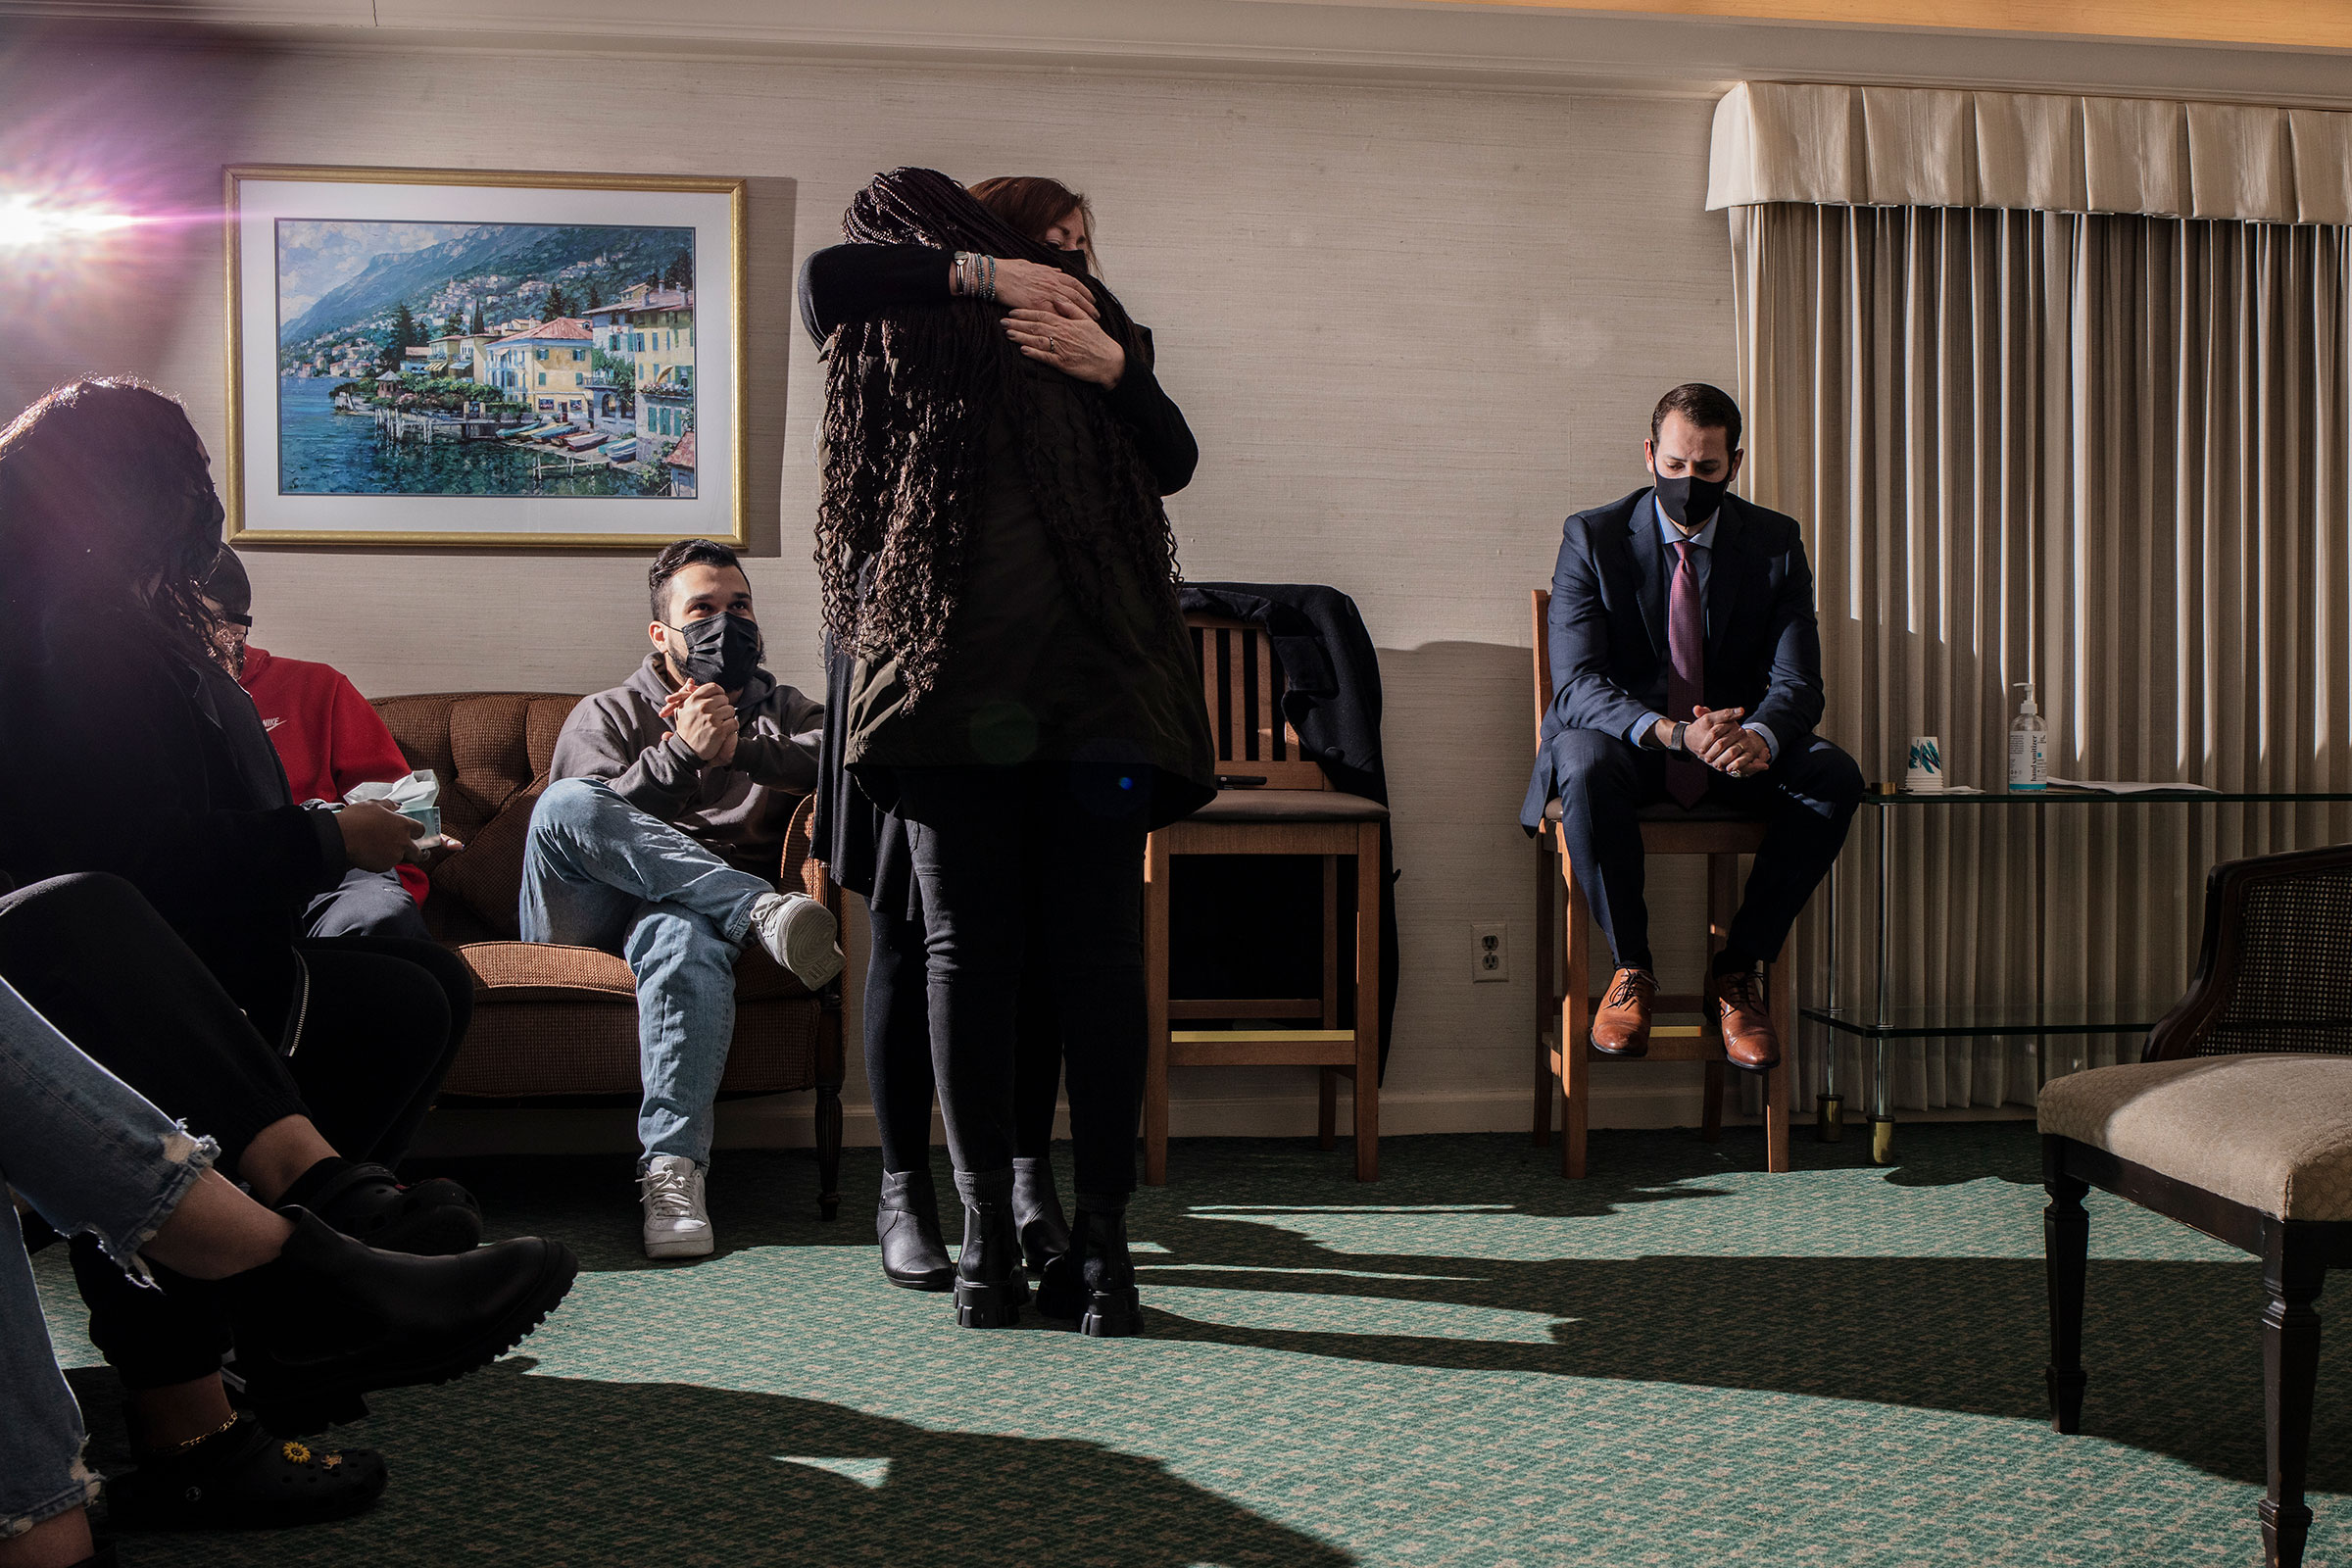 Professor Norma Bowe hugs a crying student after she read a testimonial about death she wrote for a class assignment during a Kean University course on death at Galante Funeral Home in Union, N.J., on Wednesday, February 2, 2022.CREDIT: Bryan Anselm/Redux for TIME